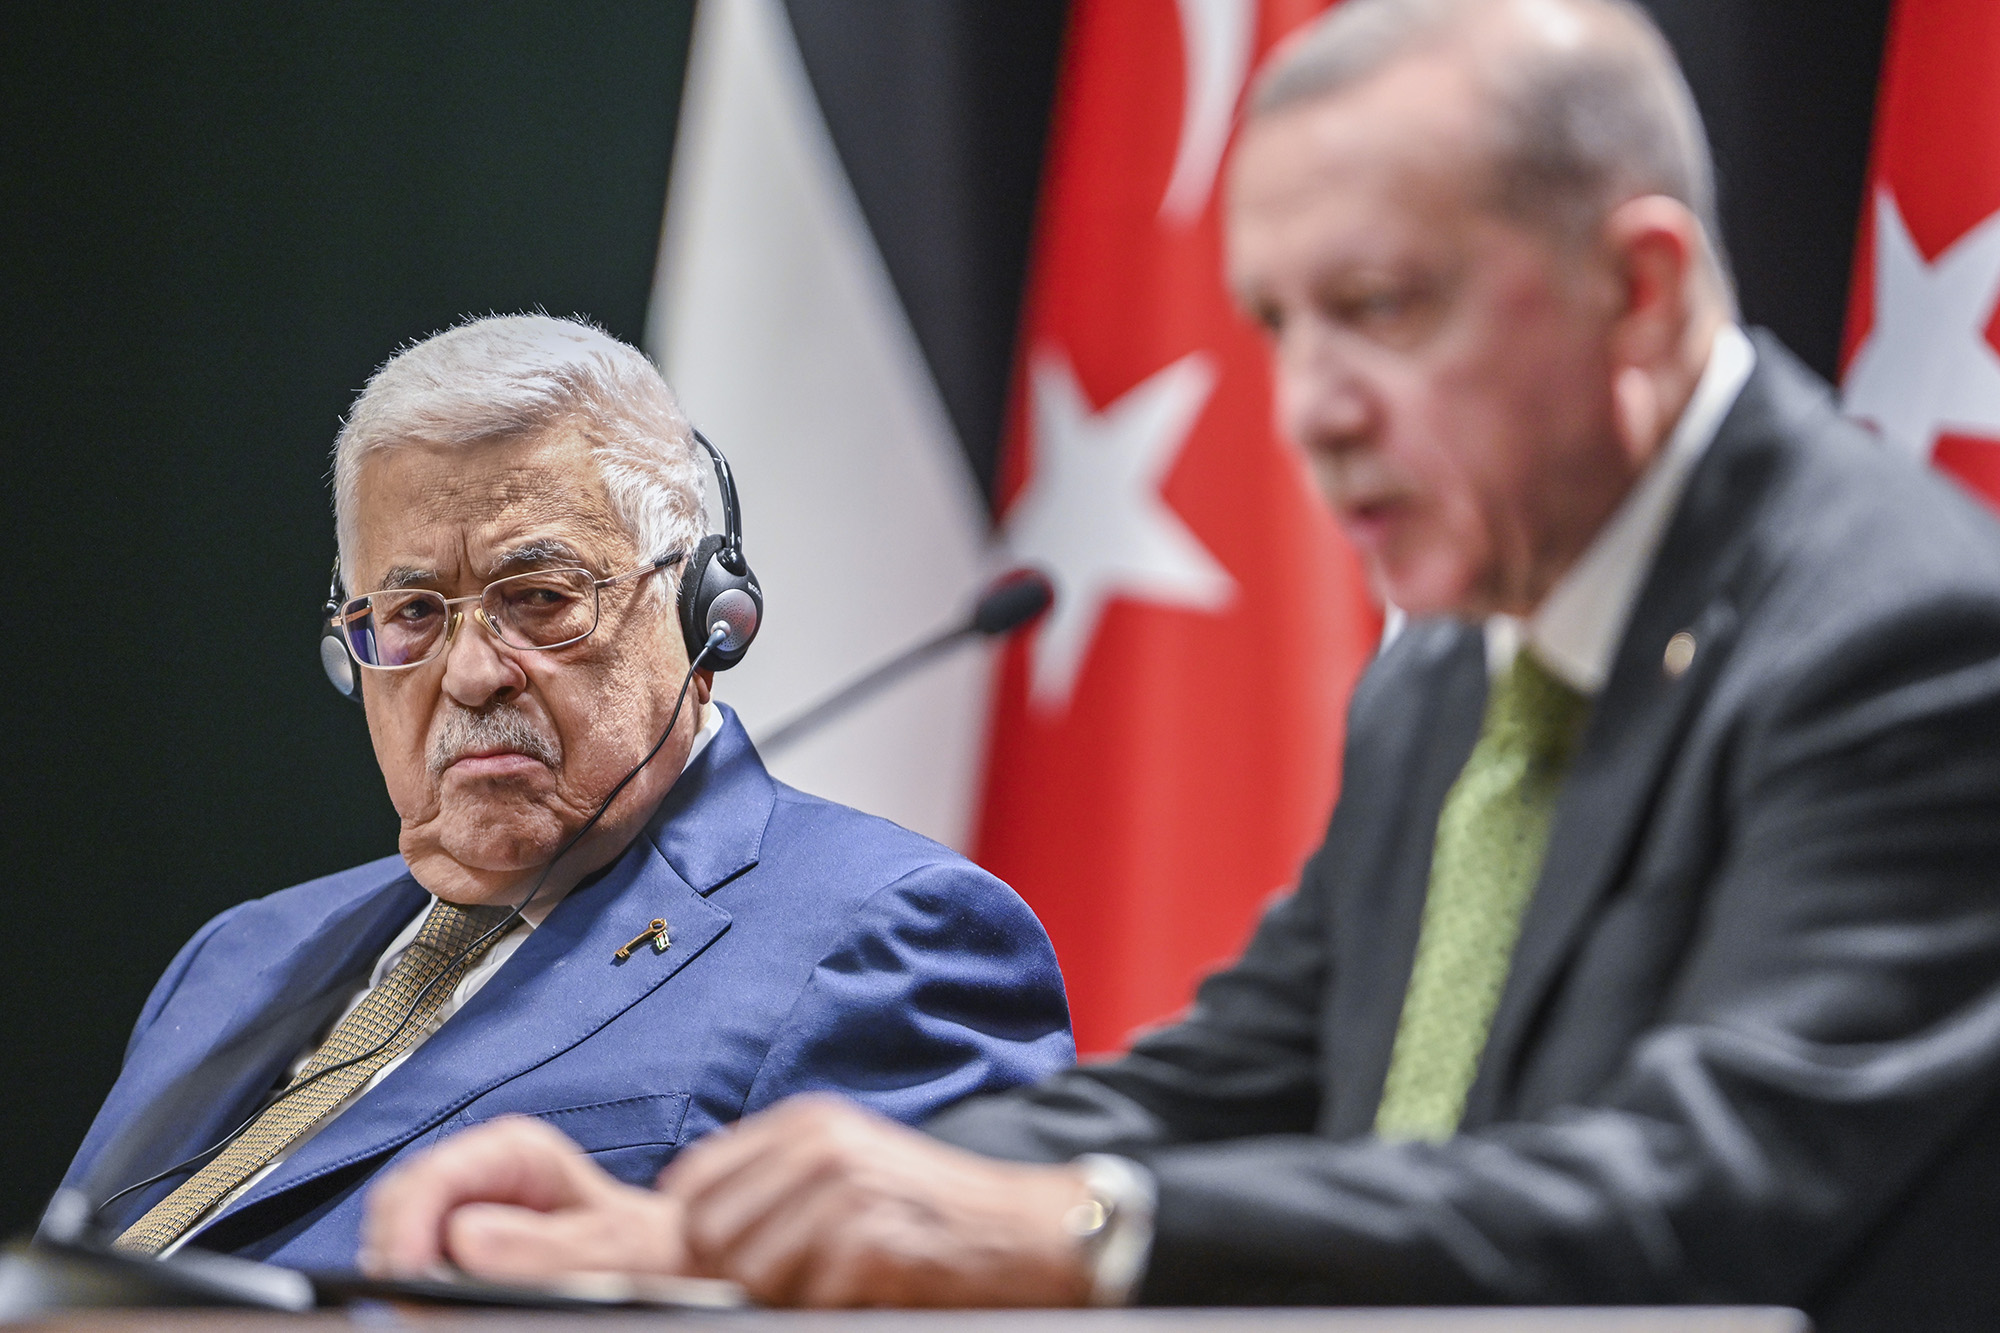 Palestinian President Mahmoud Abbas, left, looks at Turkish President Recep Tayyip Erdogan as he speaks to the media during a joint press conference at the Presidential palace in Ankara, Turkey, on March 5.